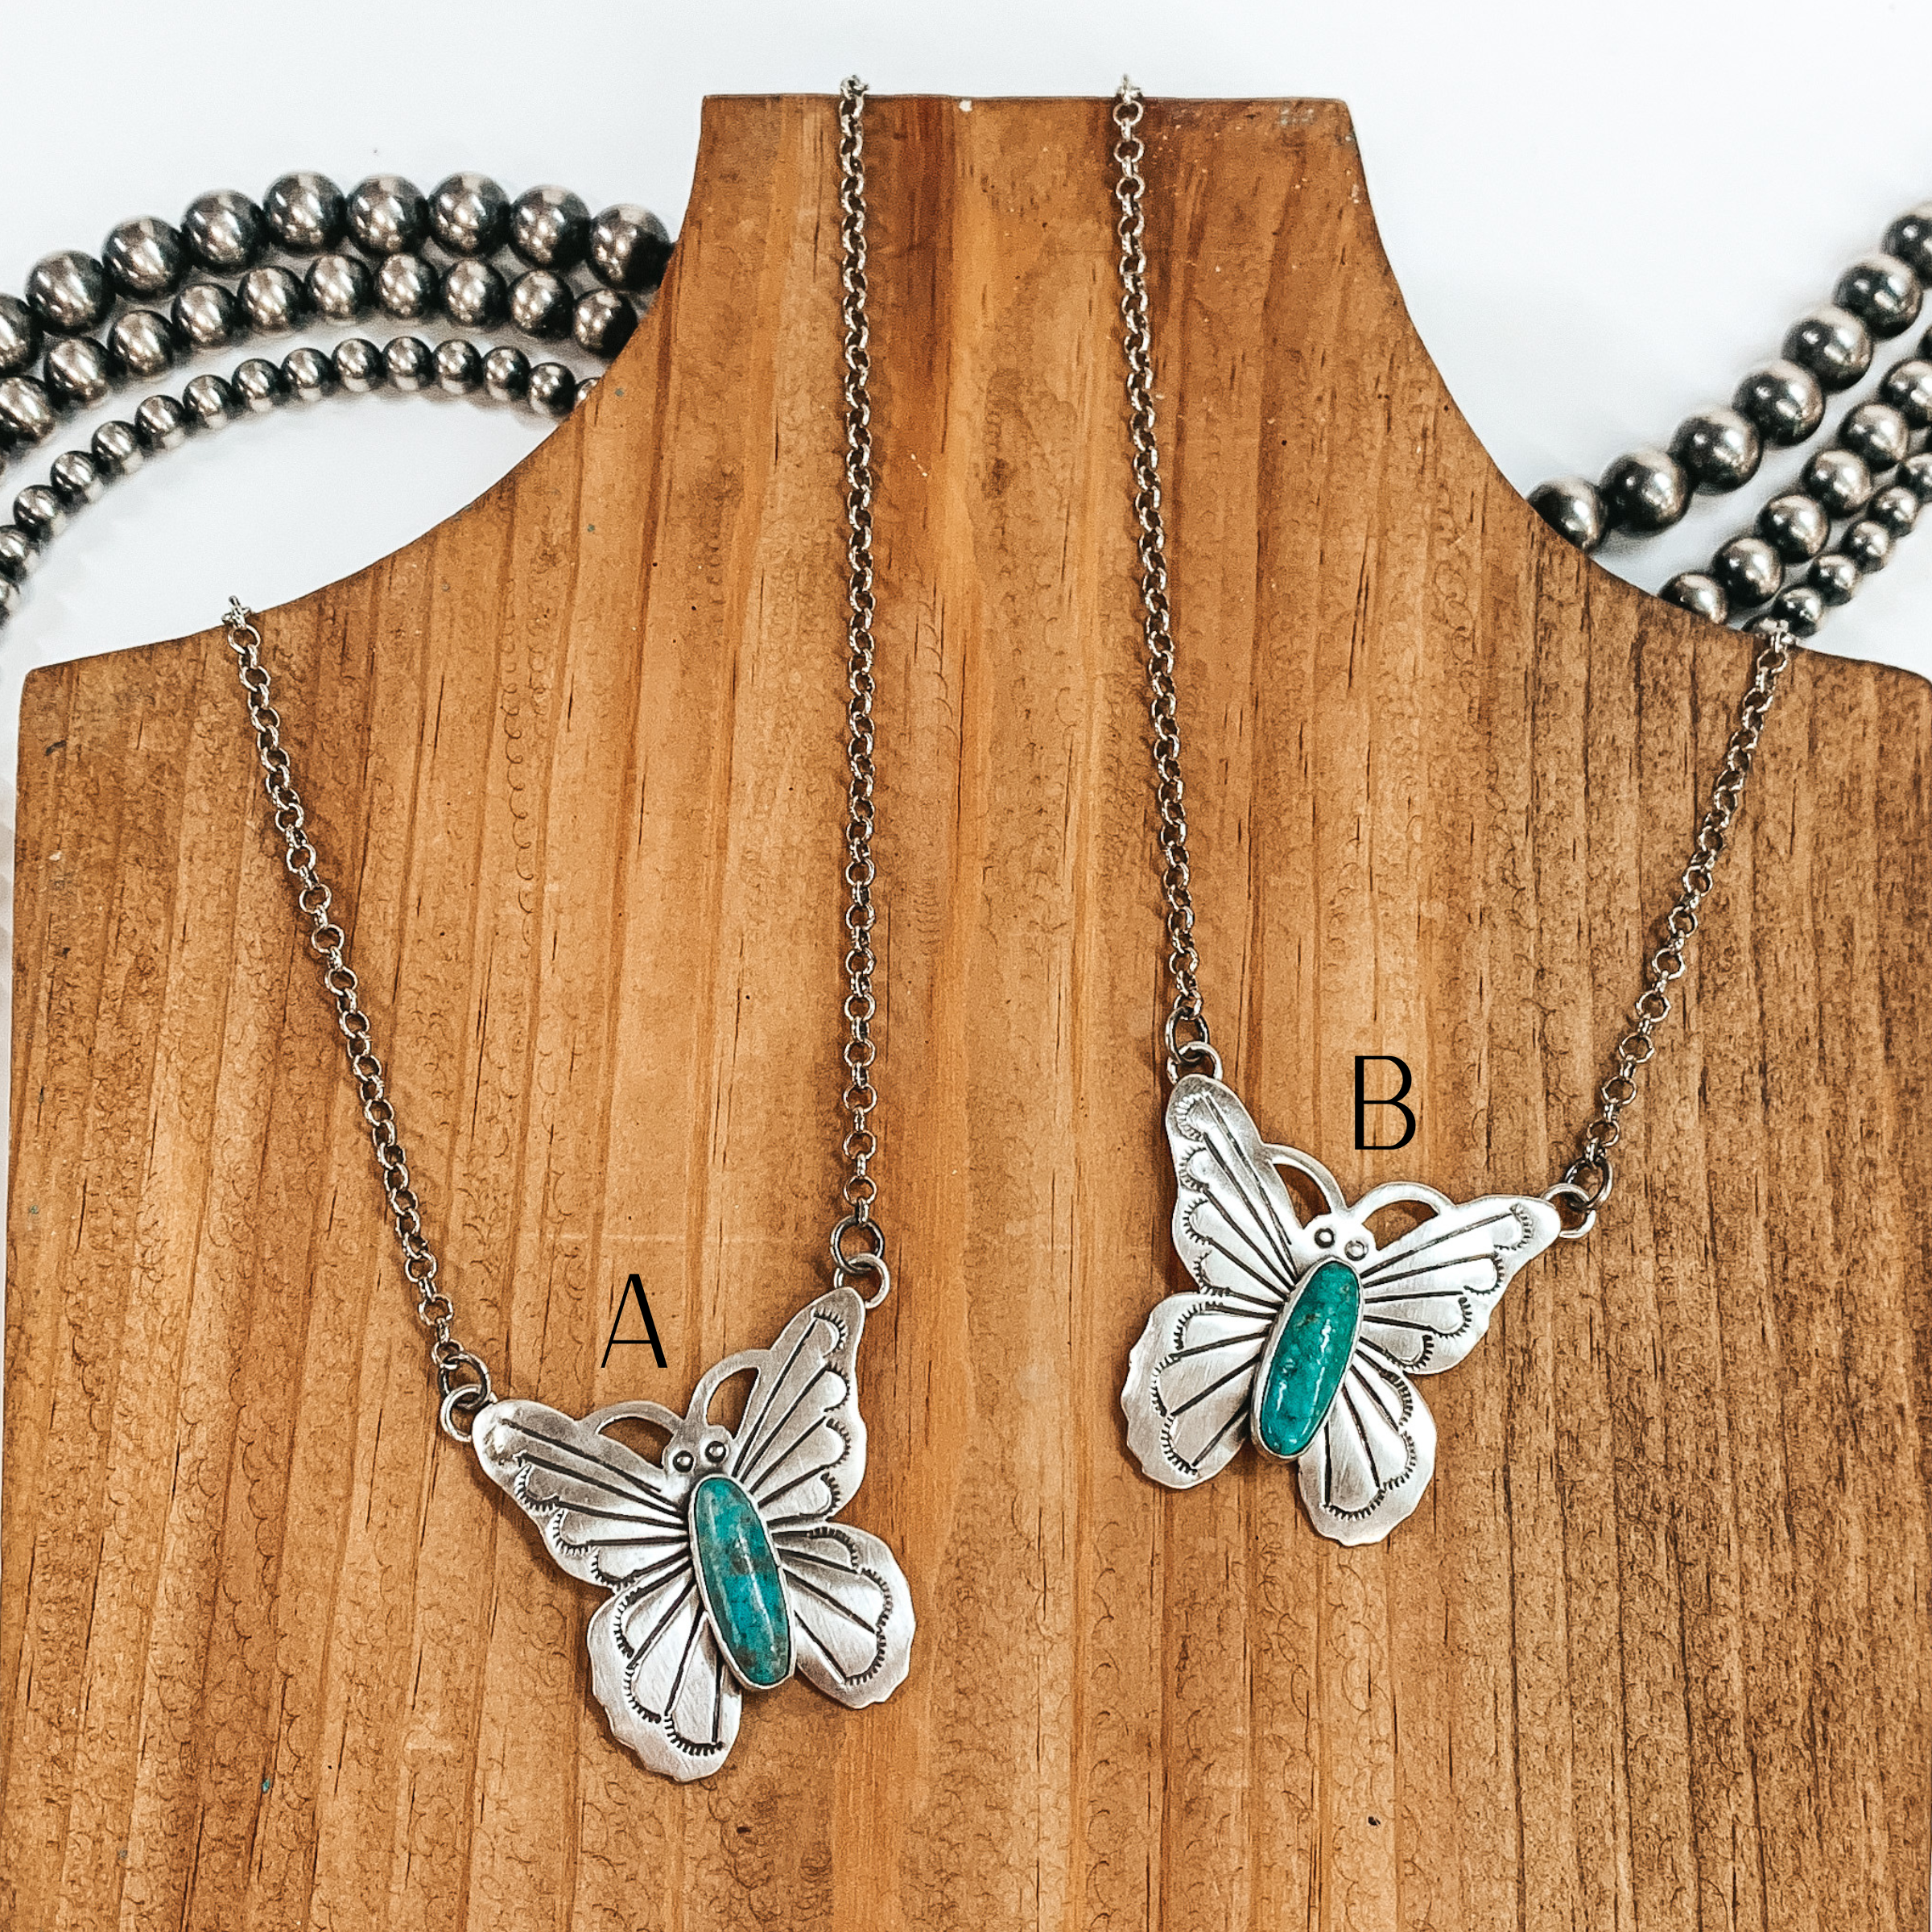 Navajo | Navajo Handmade Sterling Silver Chain Necklace with Butterfly Pendant and Center Turquoise Stone - Giddy Up Glamour Boutique